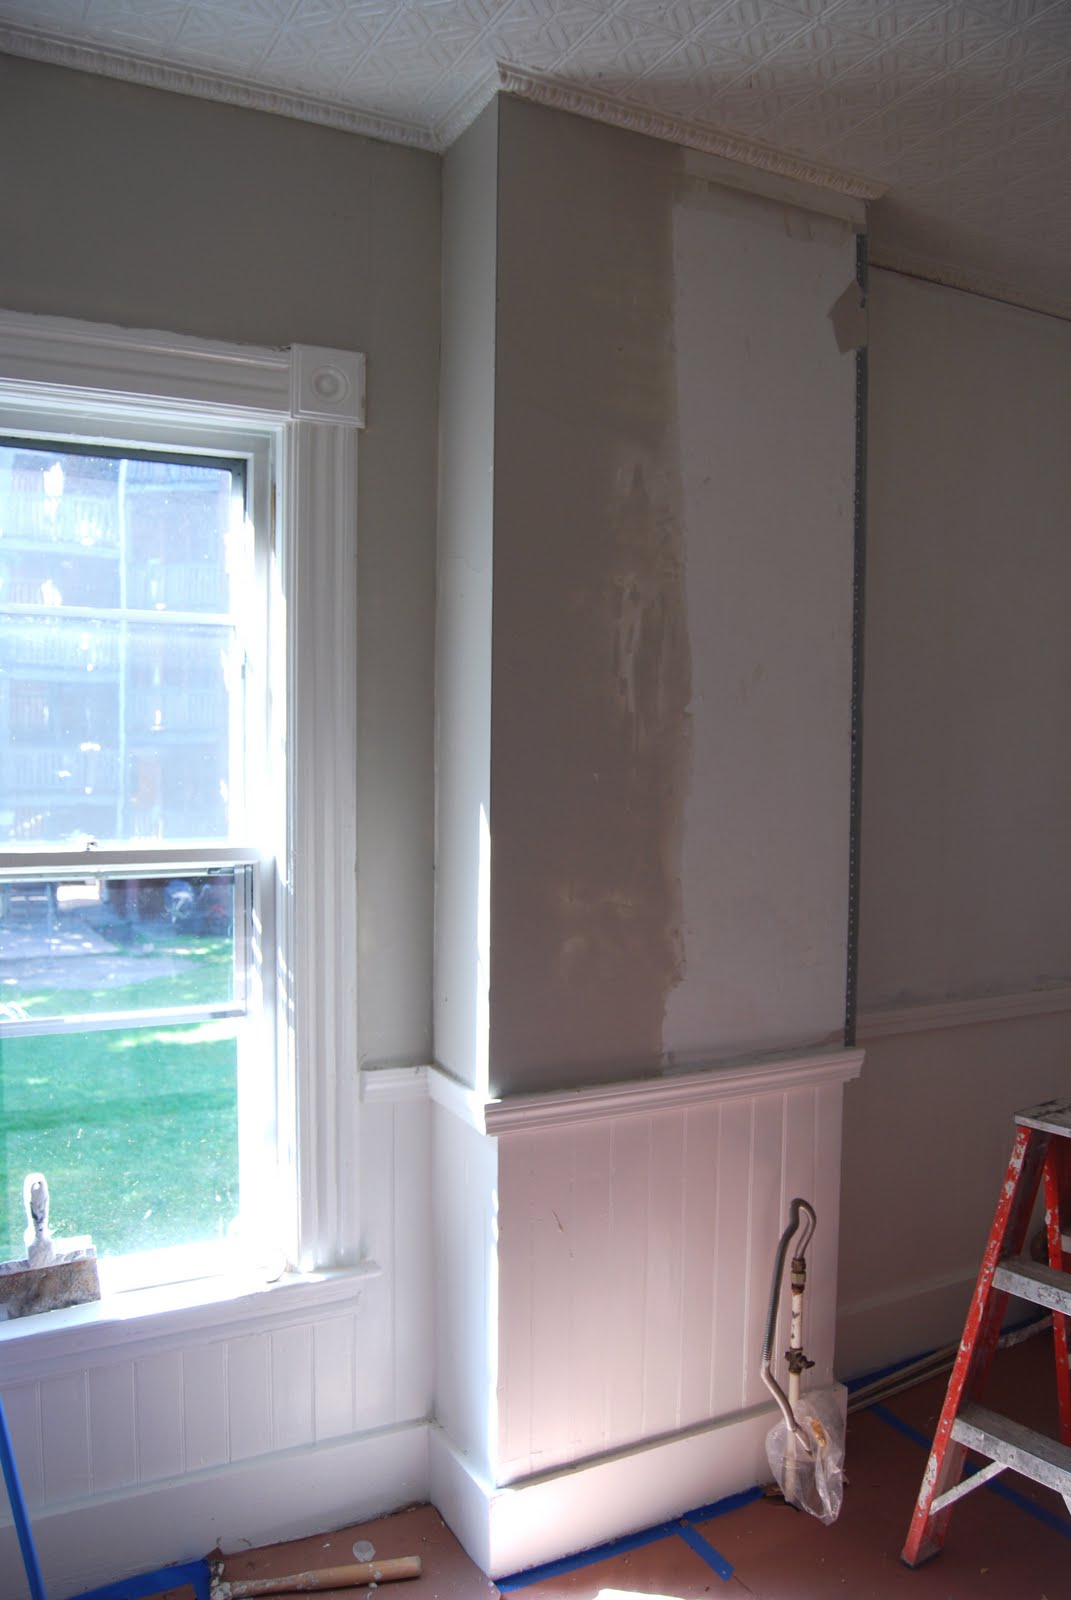  of removing wallpaper vs. skim coating over the wallpaper with wallboard 